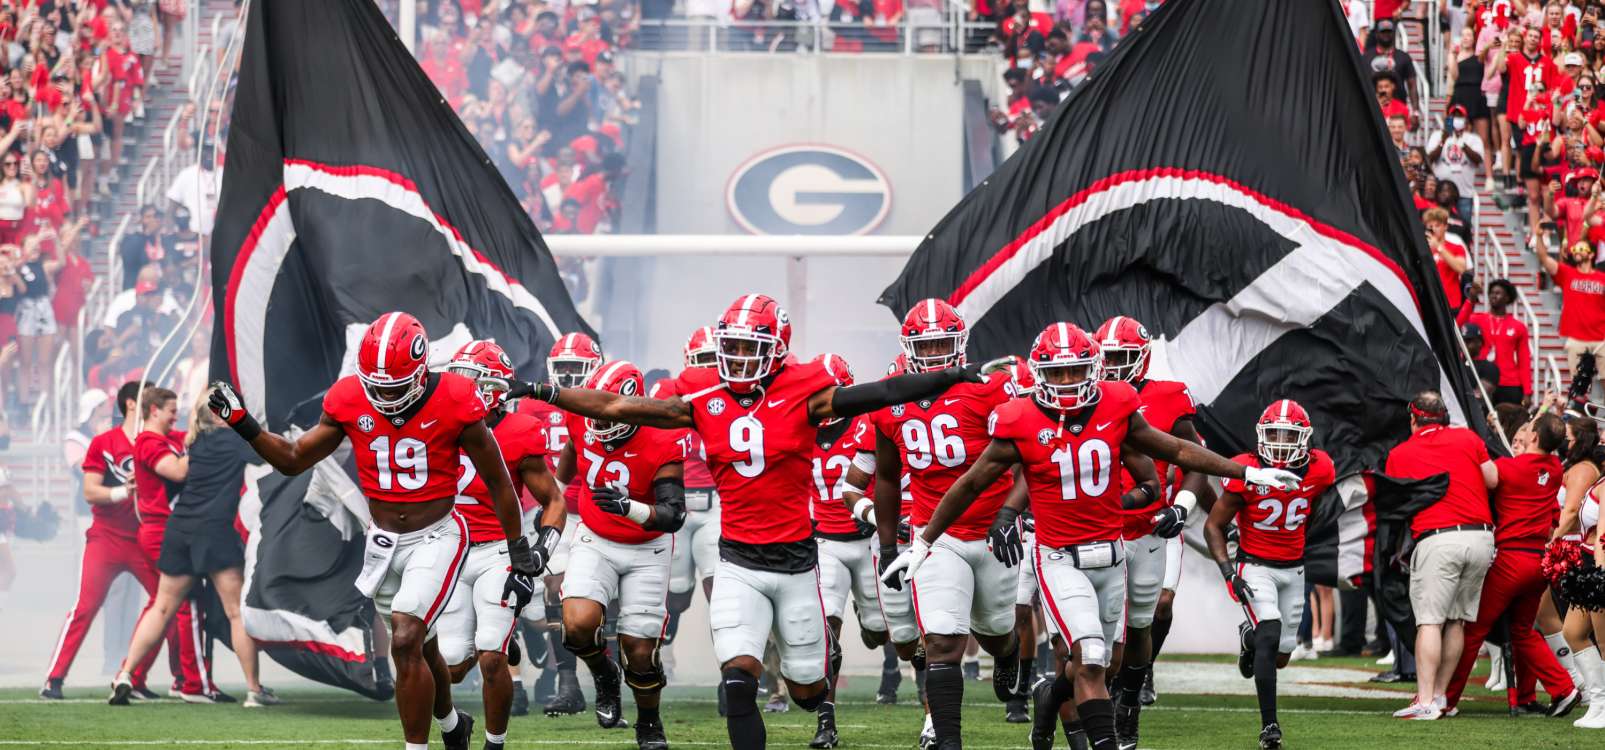 UGA Football Weekend in Athens Things to Do and Attractions